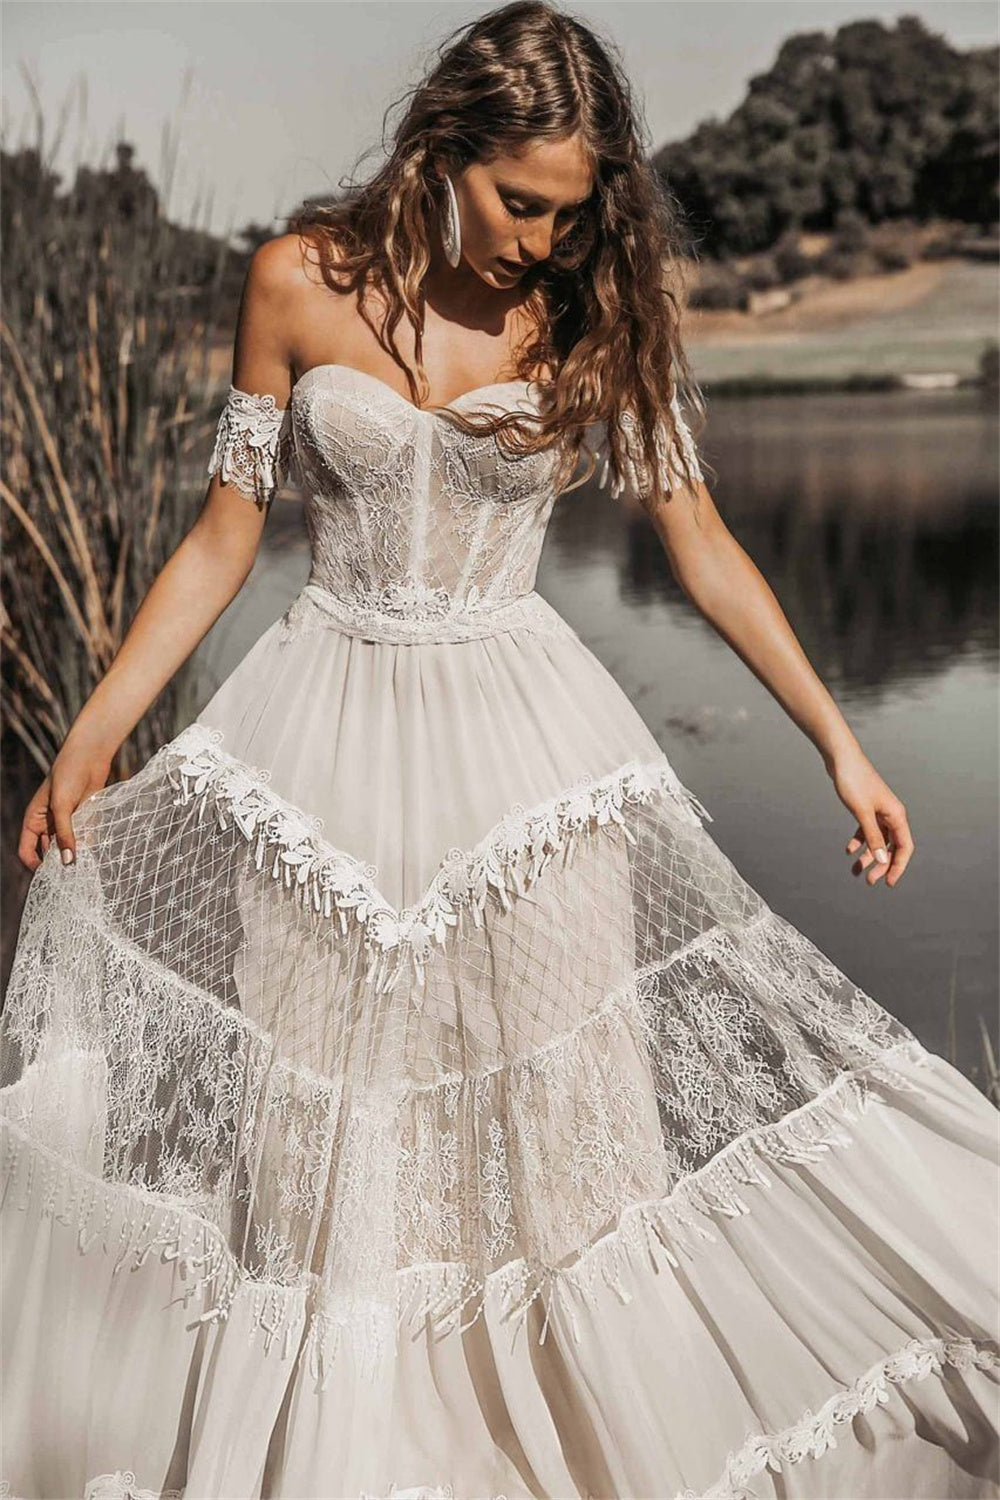 Chic Bohemian Wedding Dresses with Vintage-Inspired Details